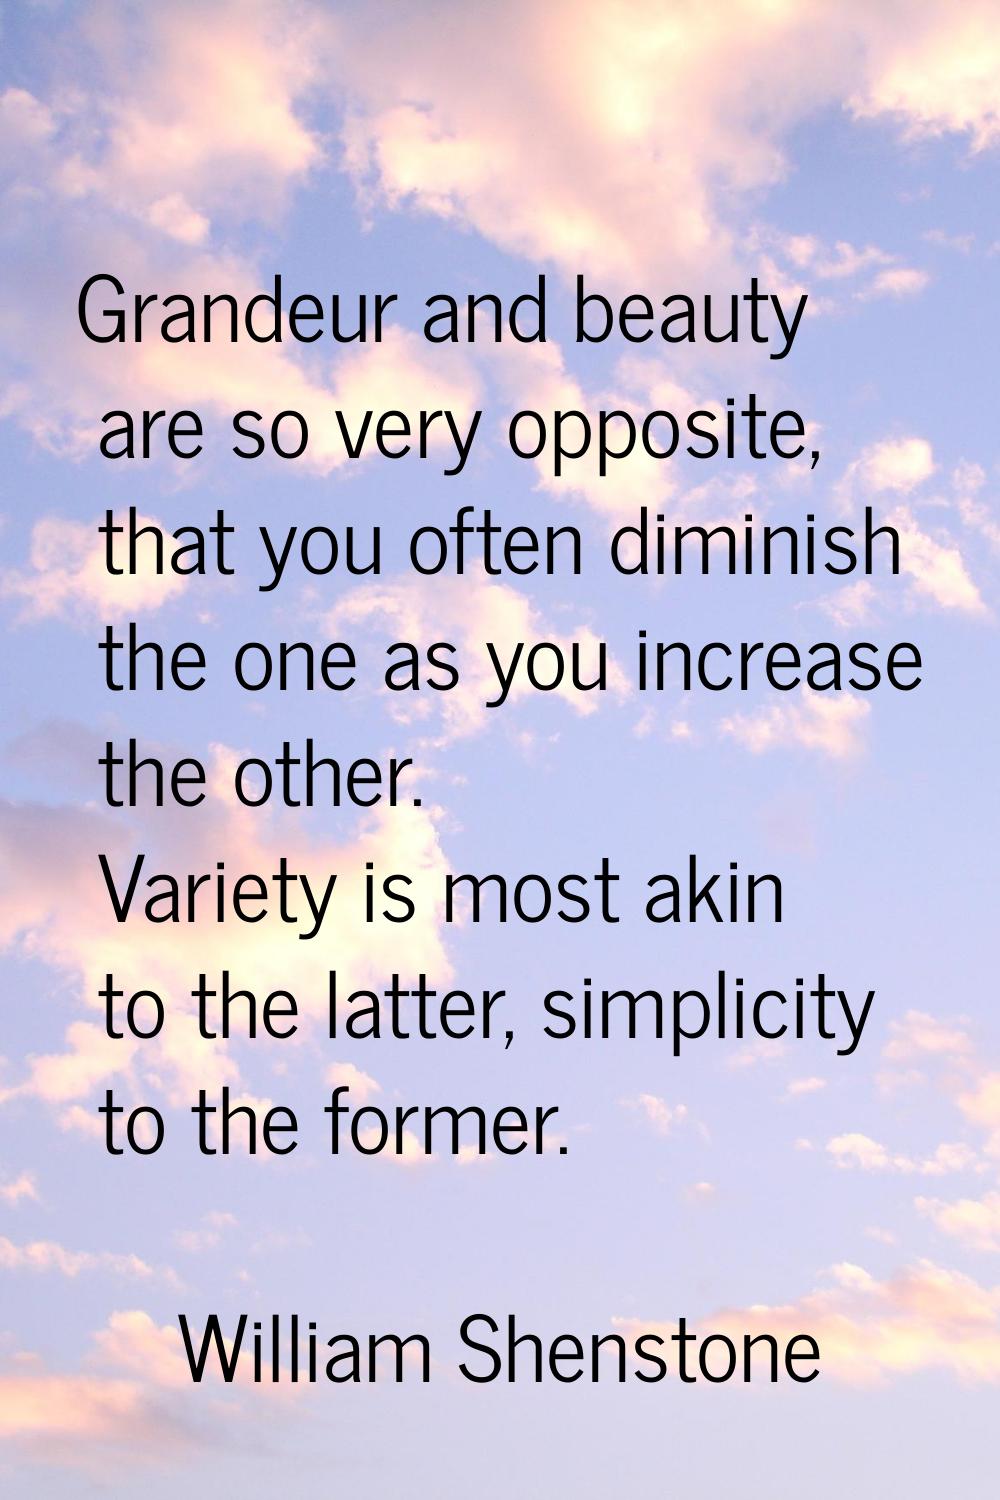 Grandeur and beauty are so very opposite, that you often diminish the one as you increase the other